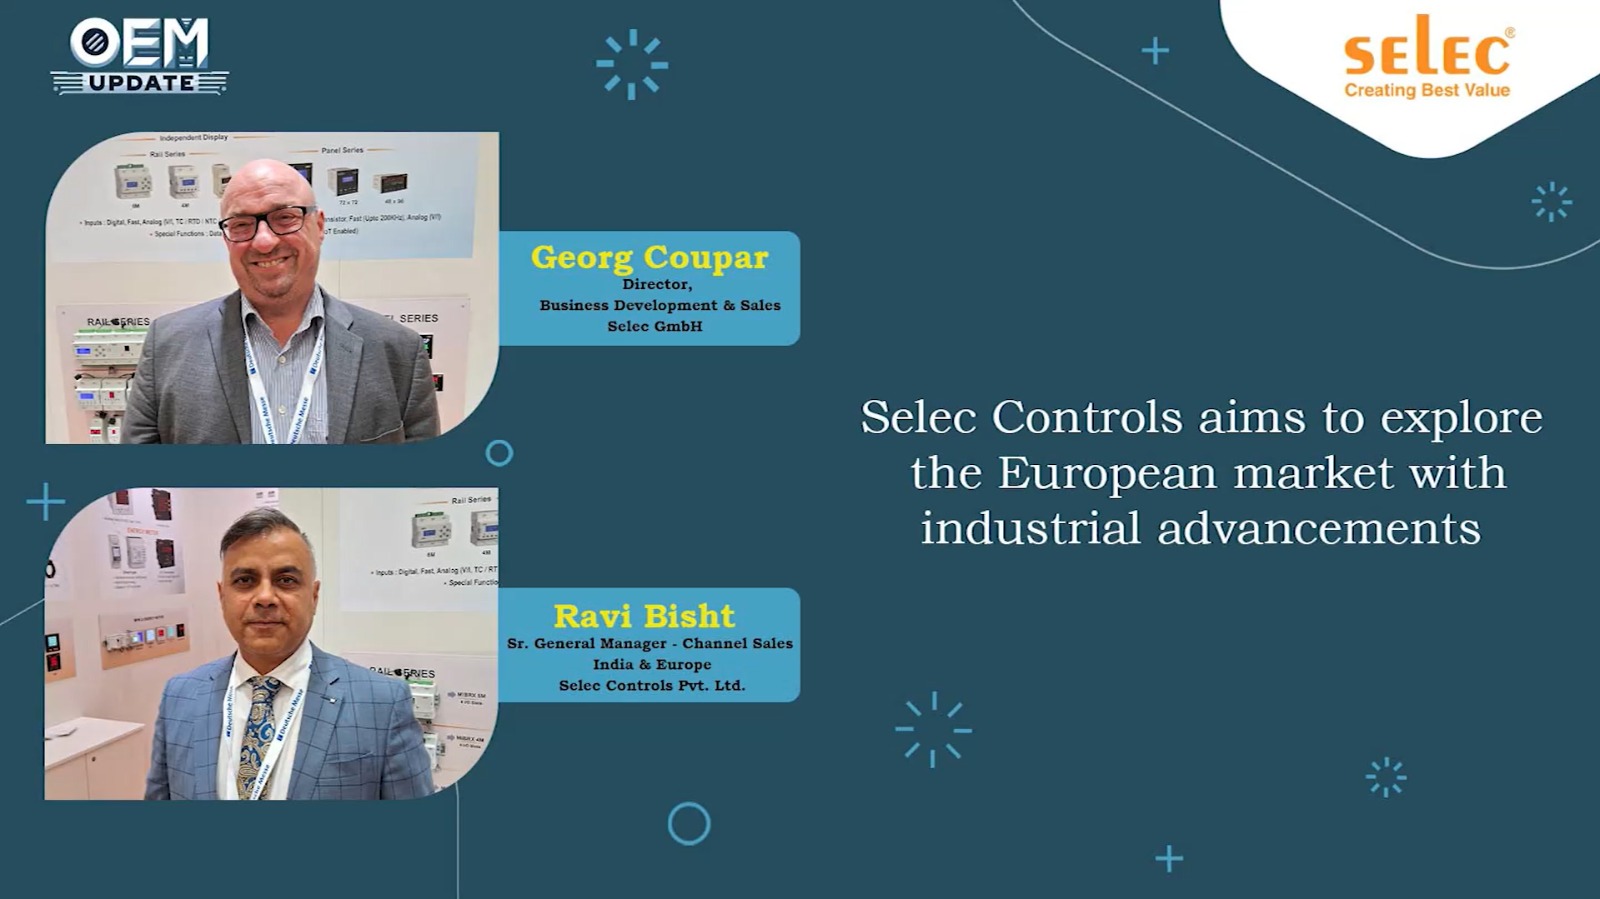 Selec Controls aims to explore the European market with industrial advancement | OEM Update Magazine